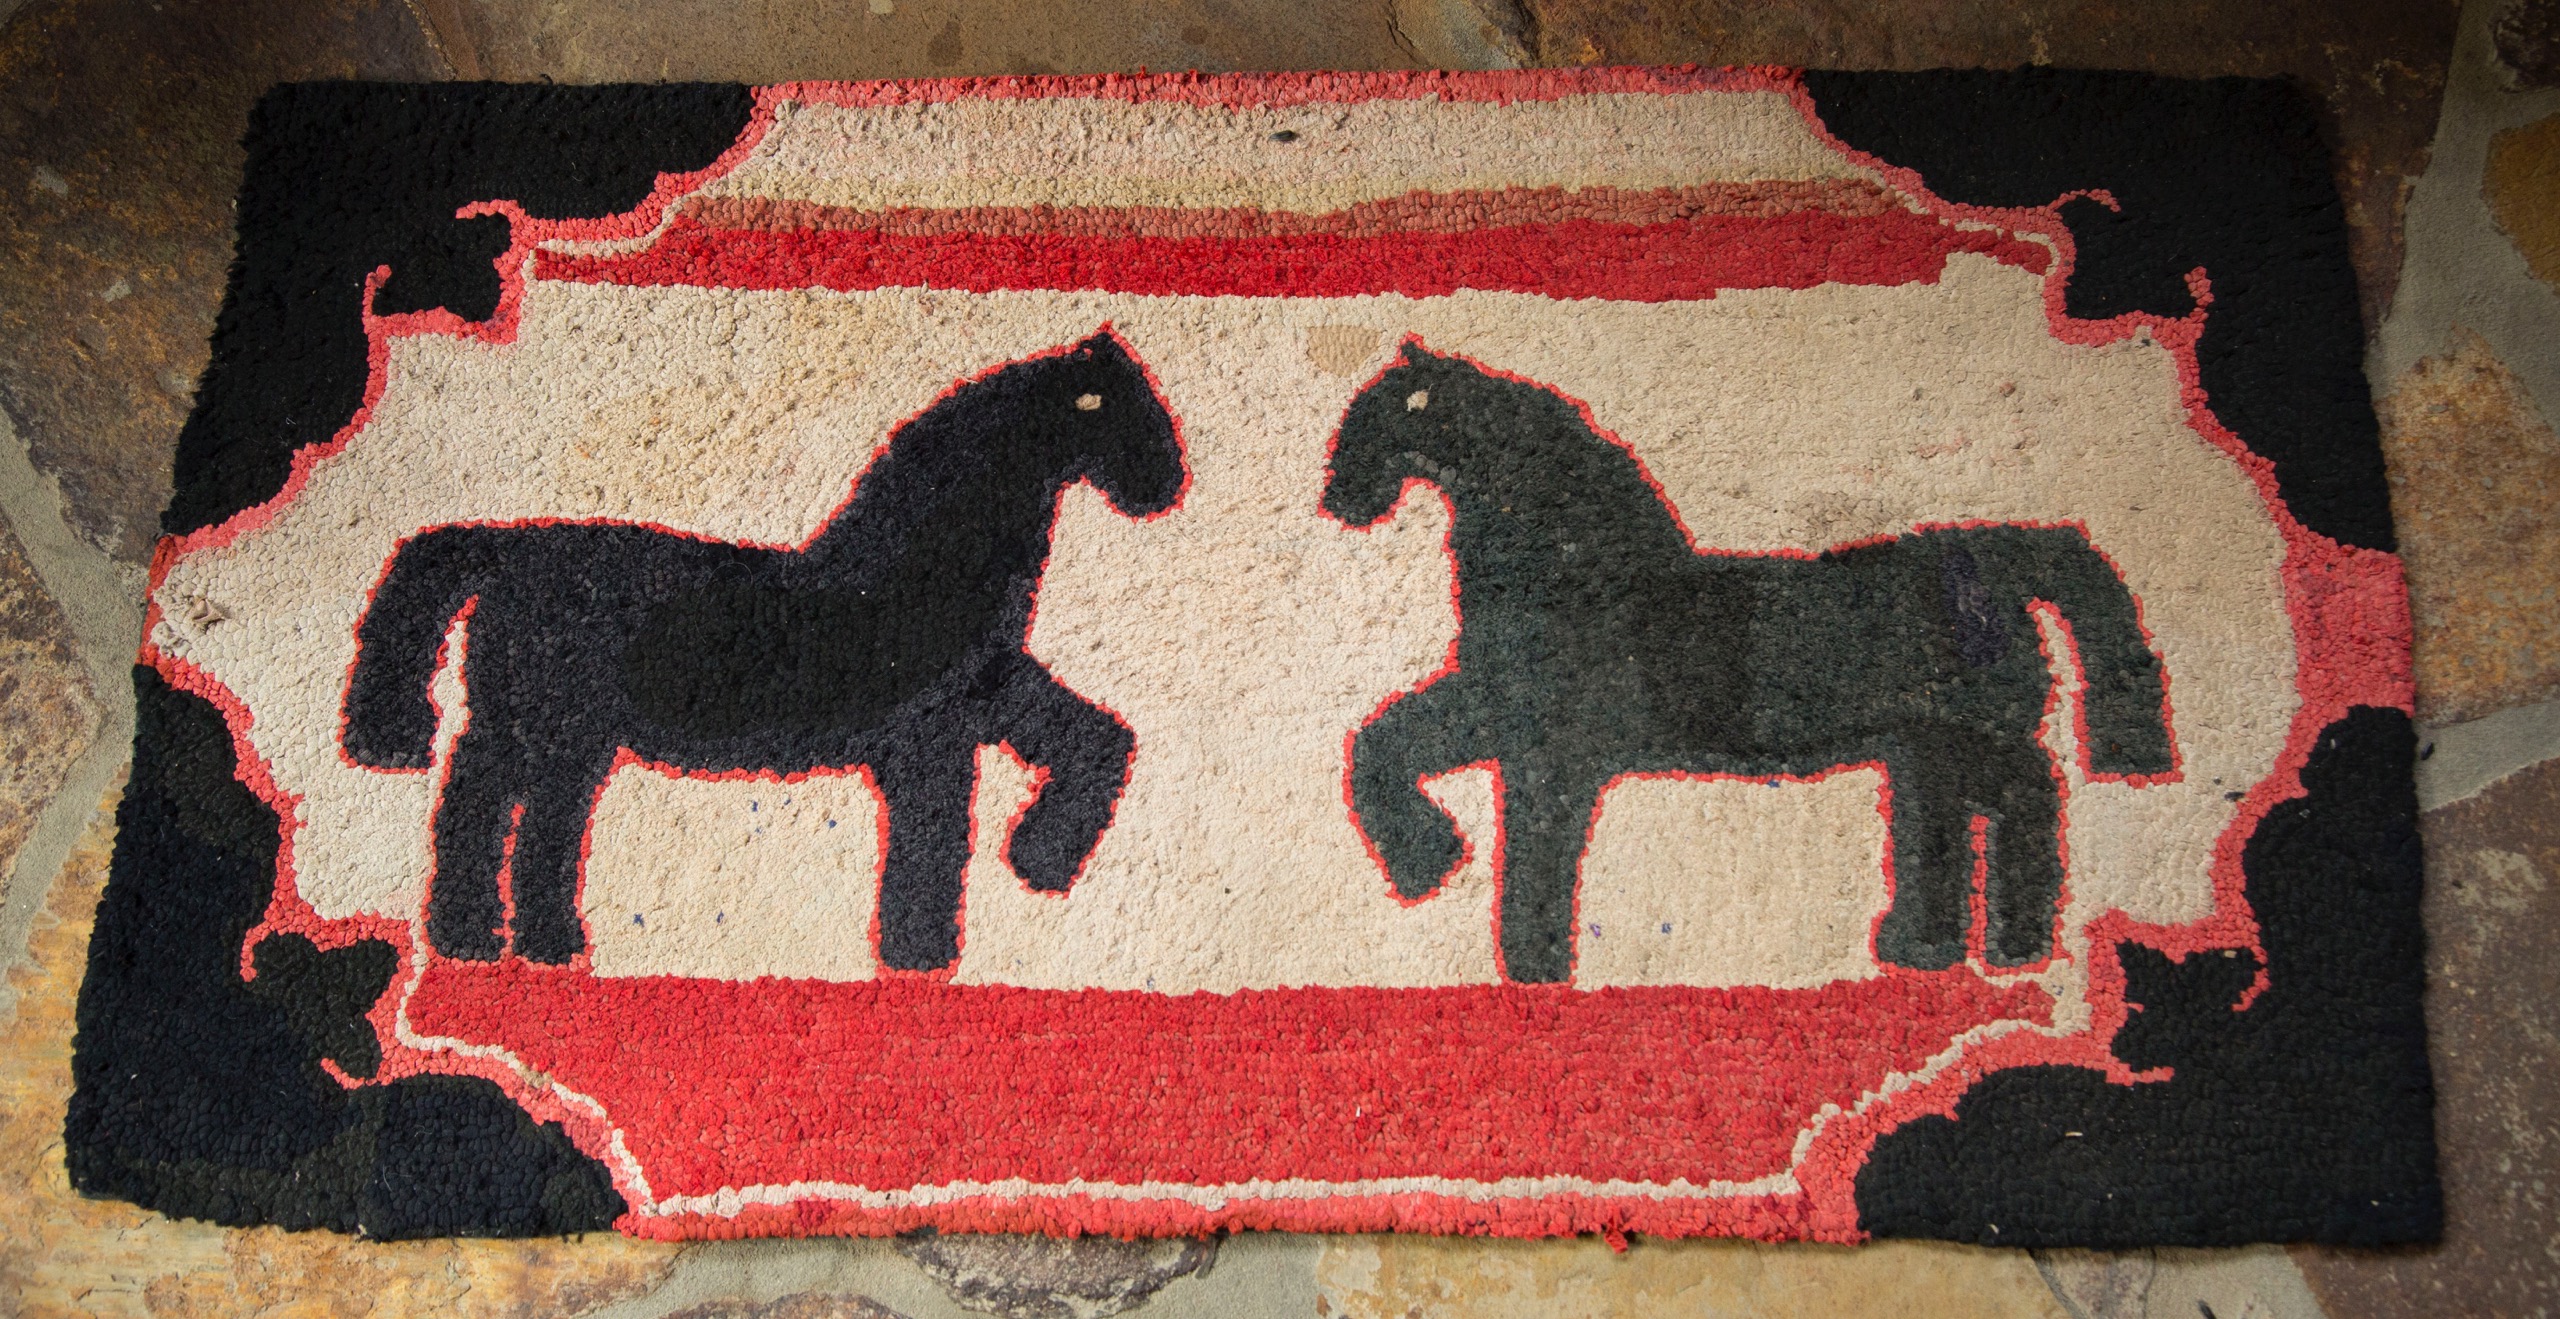 Early rag rugs like this one of a horse-to-horse greeting are better preserved as wall hangings rather than displayed underfoot